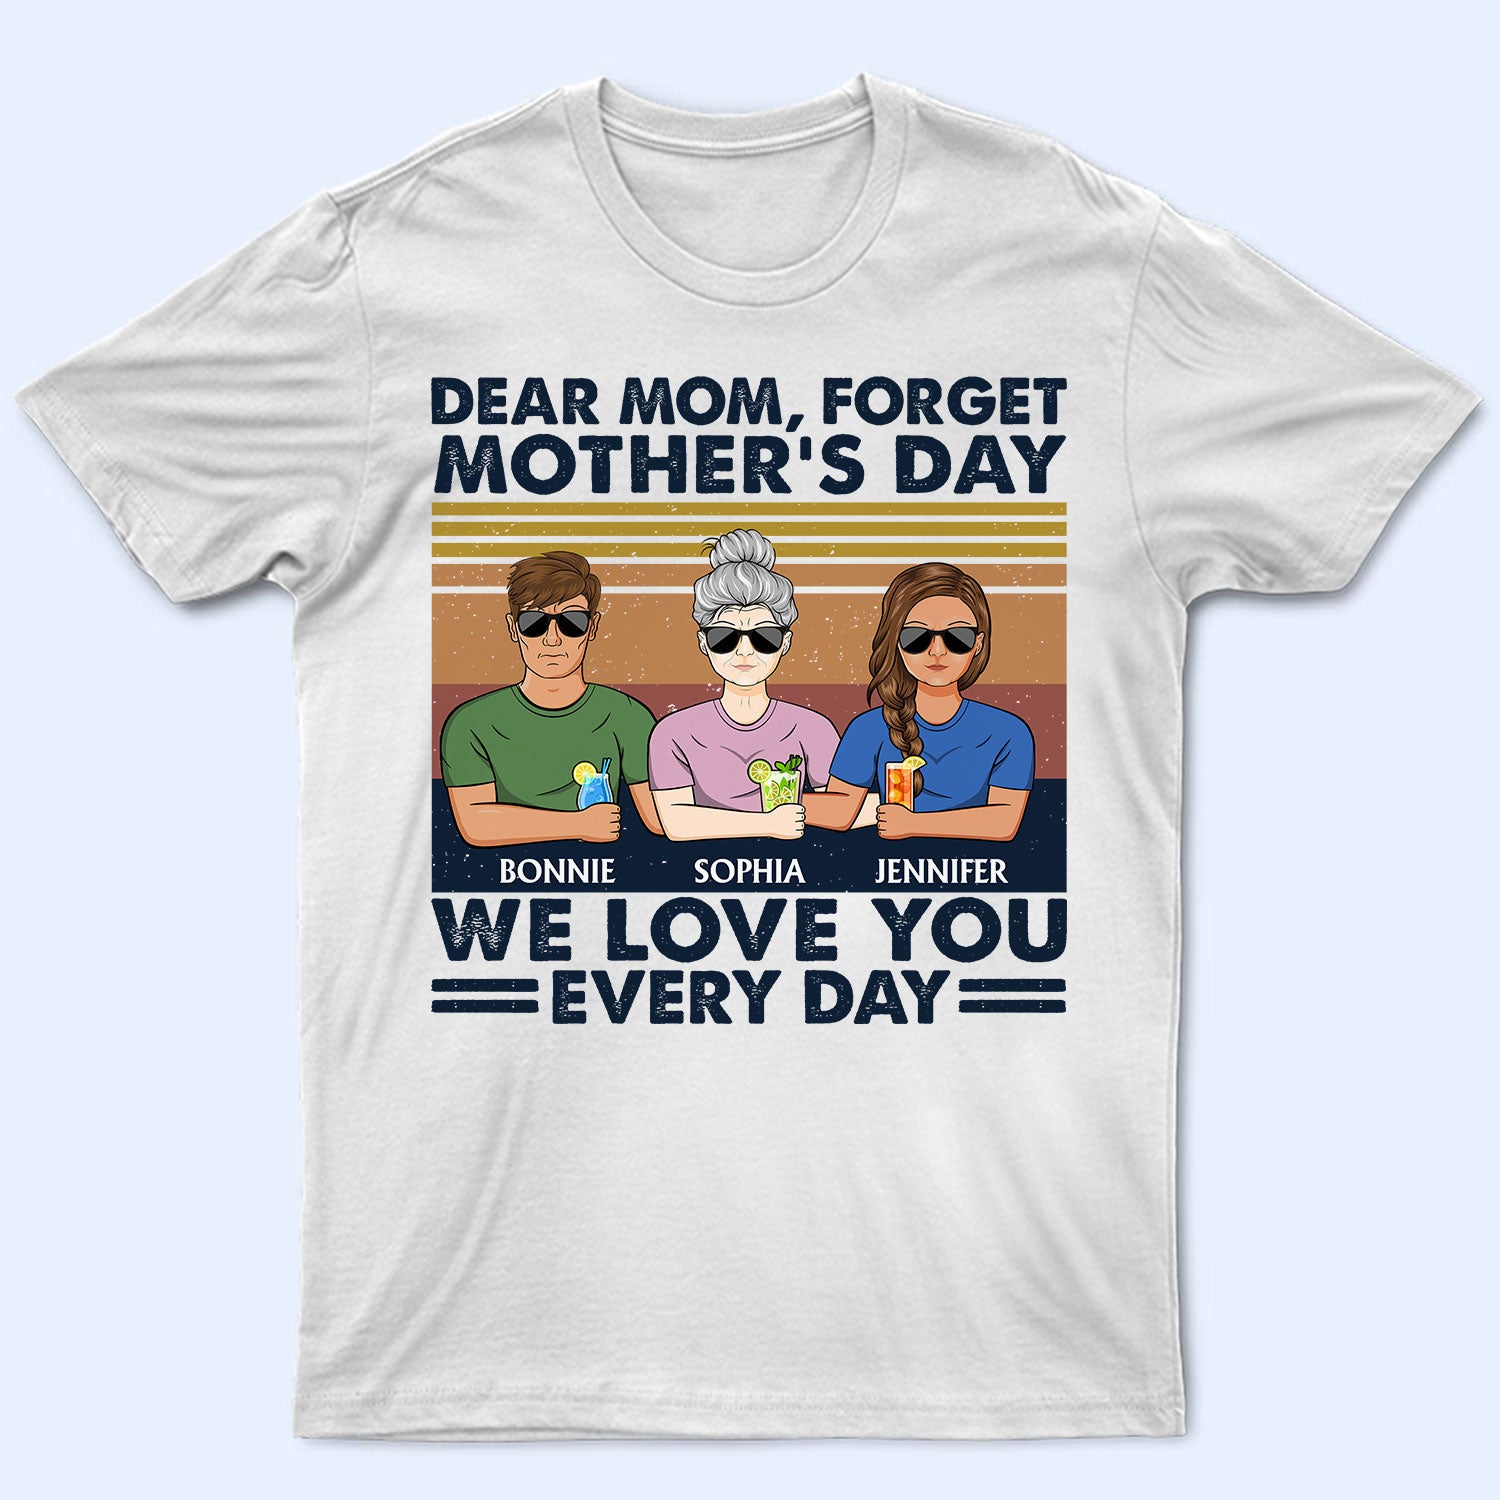 Dear Mom We Love You Every Day Retro - Birthday, Loving Gift For Mother, Mama, Grandma, Grandmother - Personalized Custom T Shirt